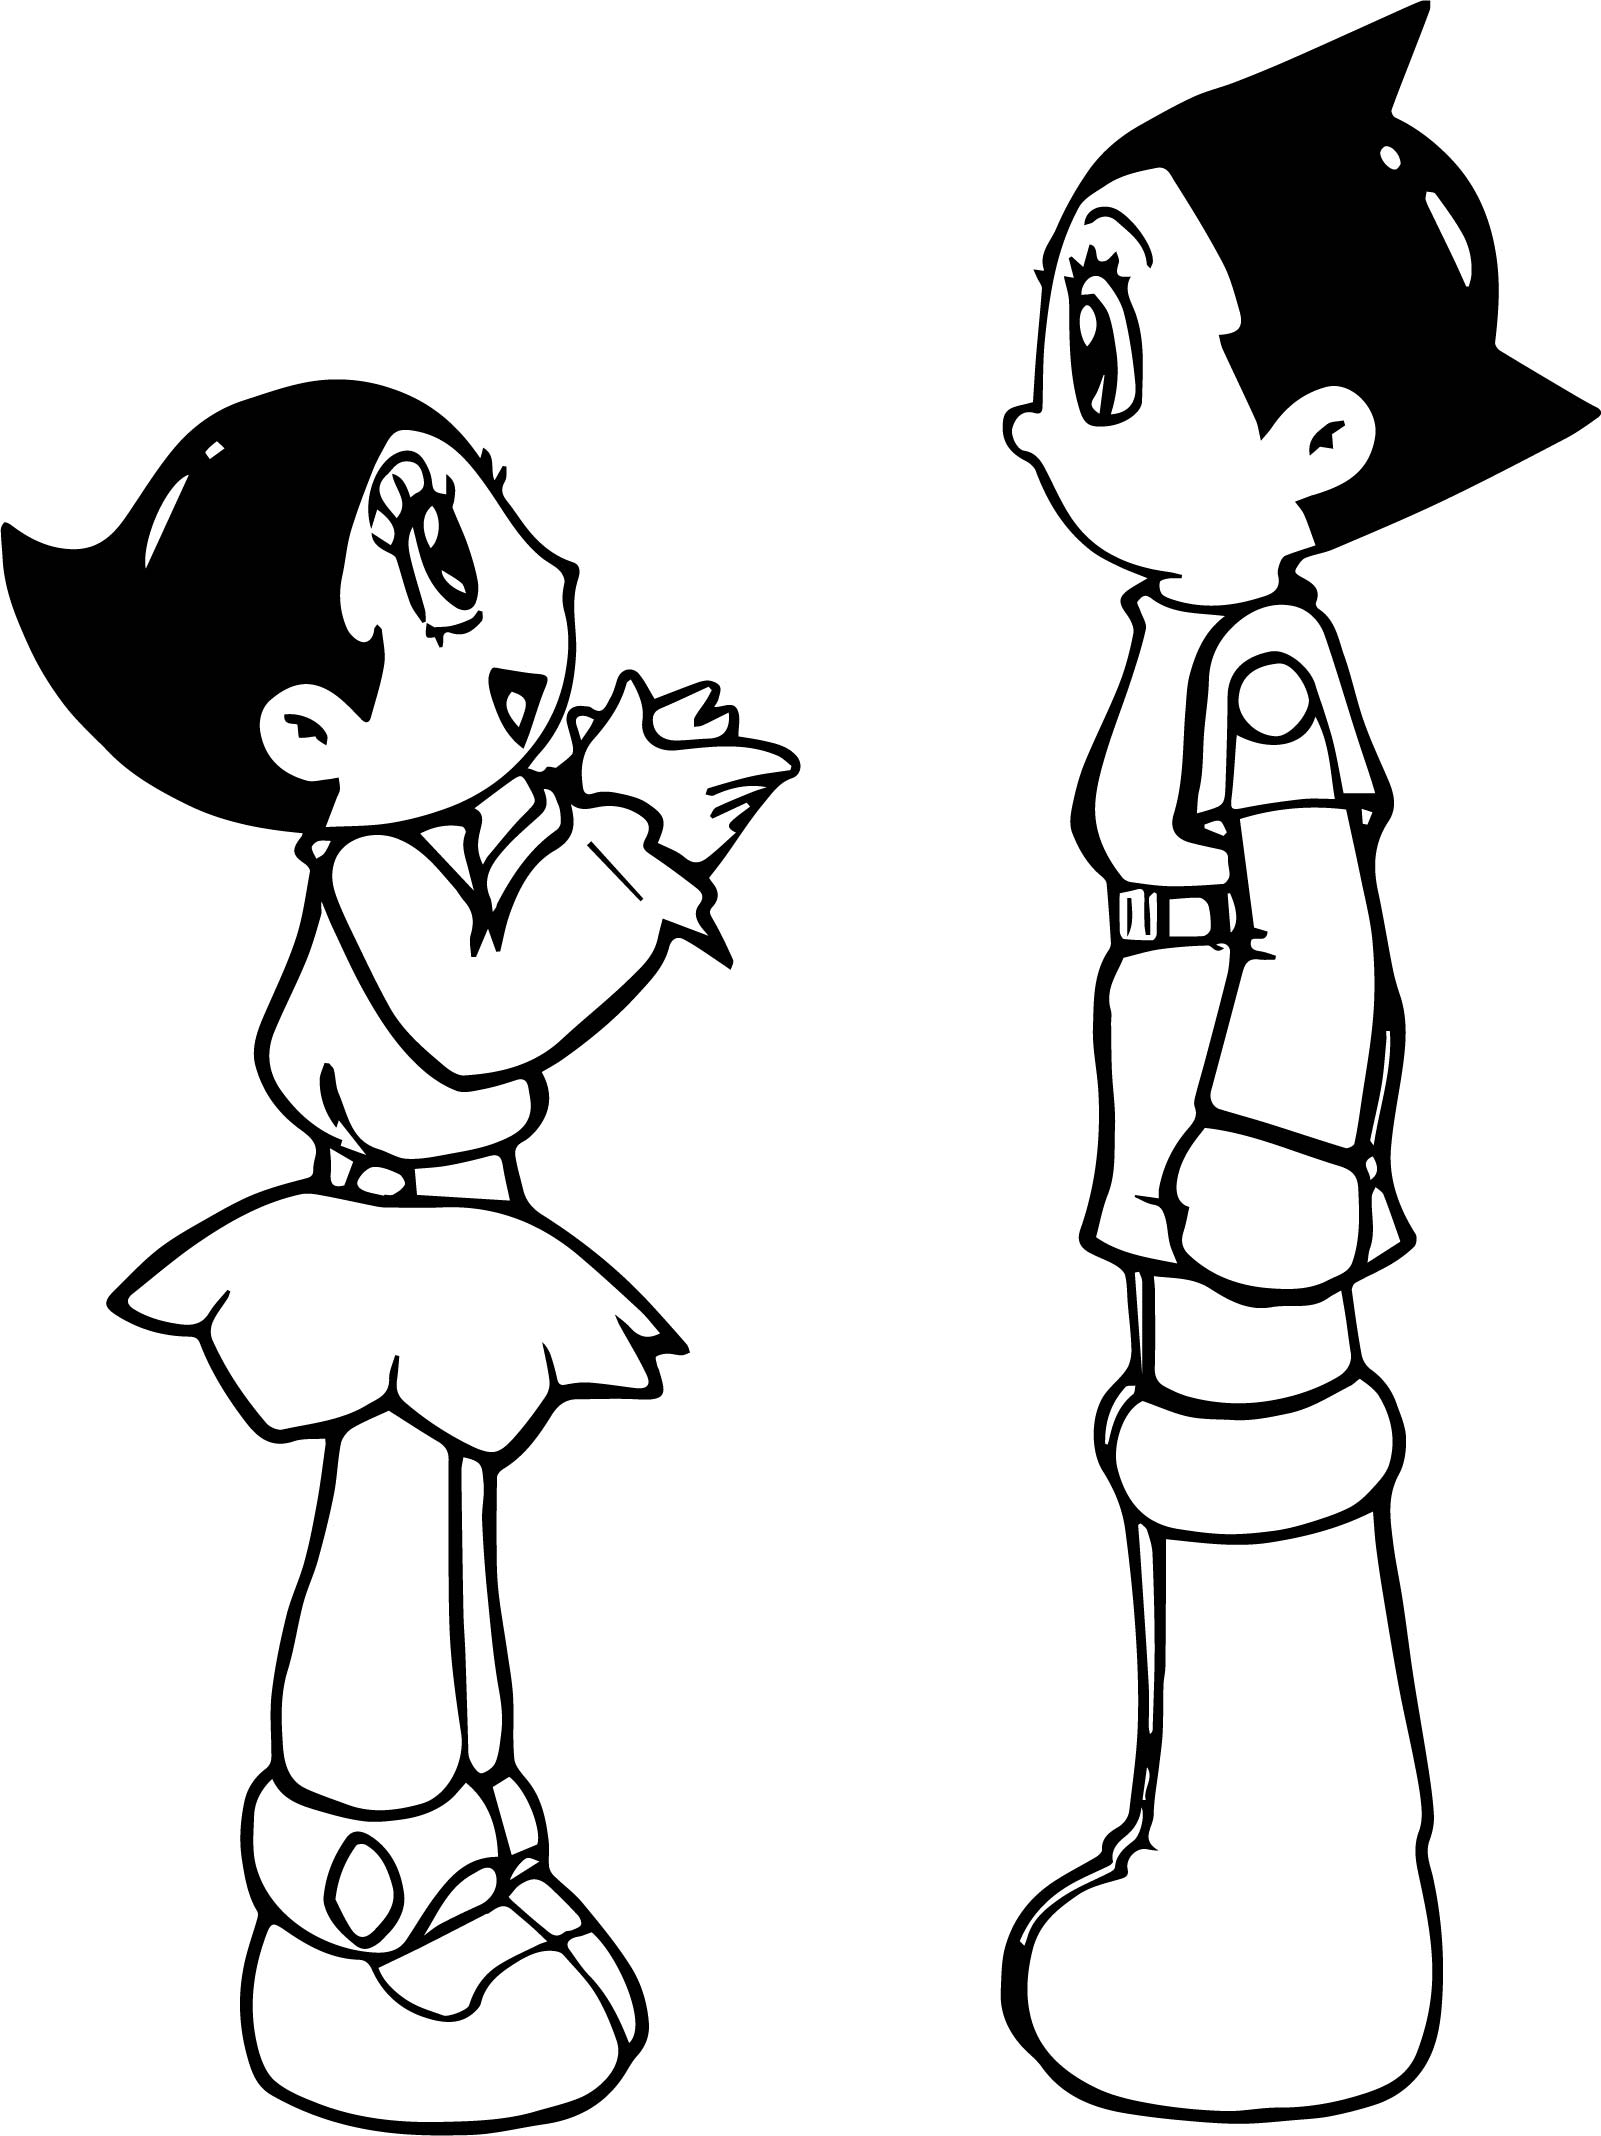 Cute Talking Coloring Page with simple drawing